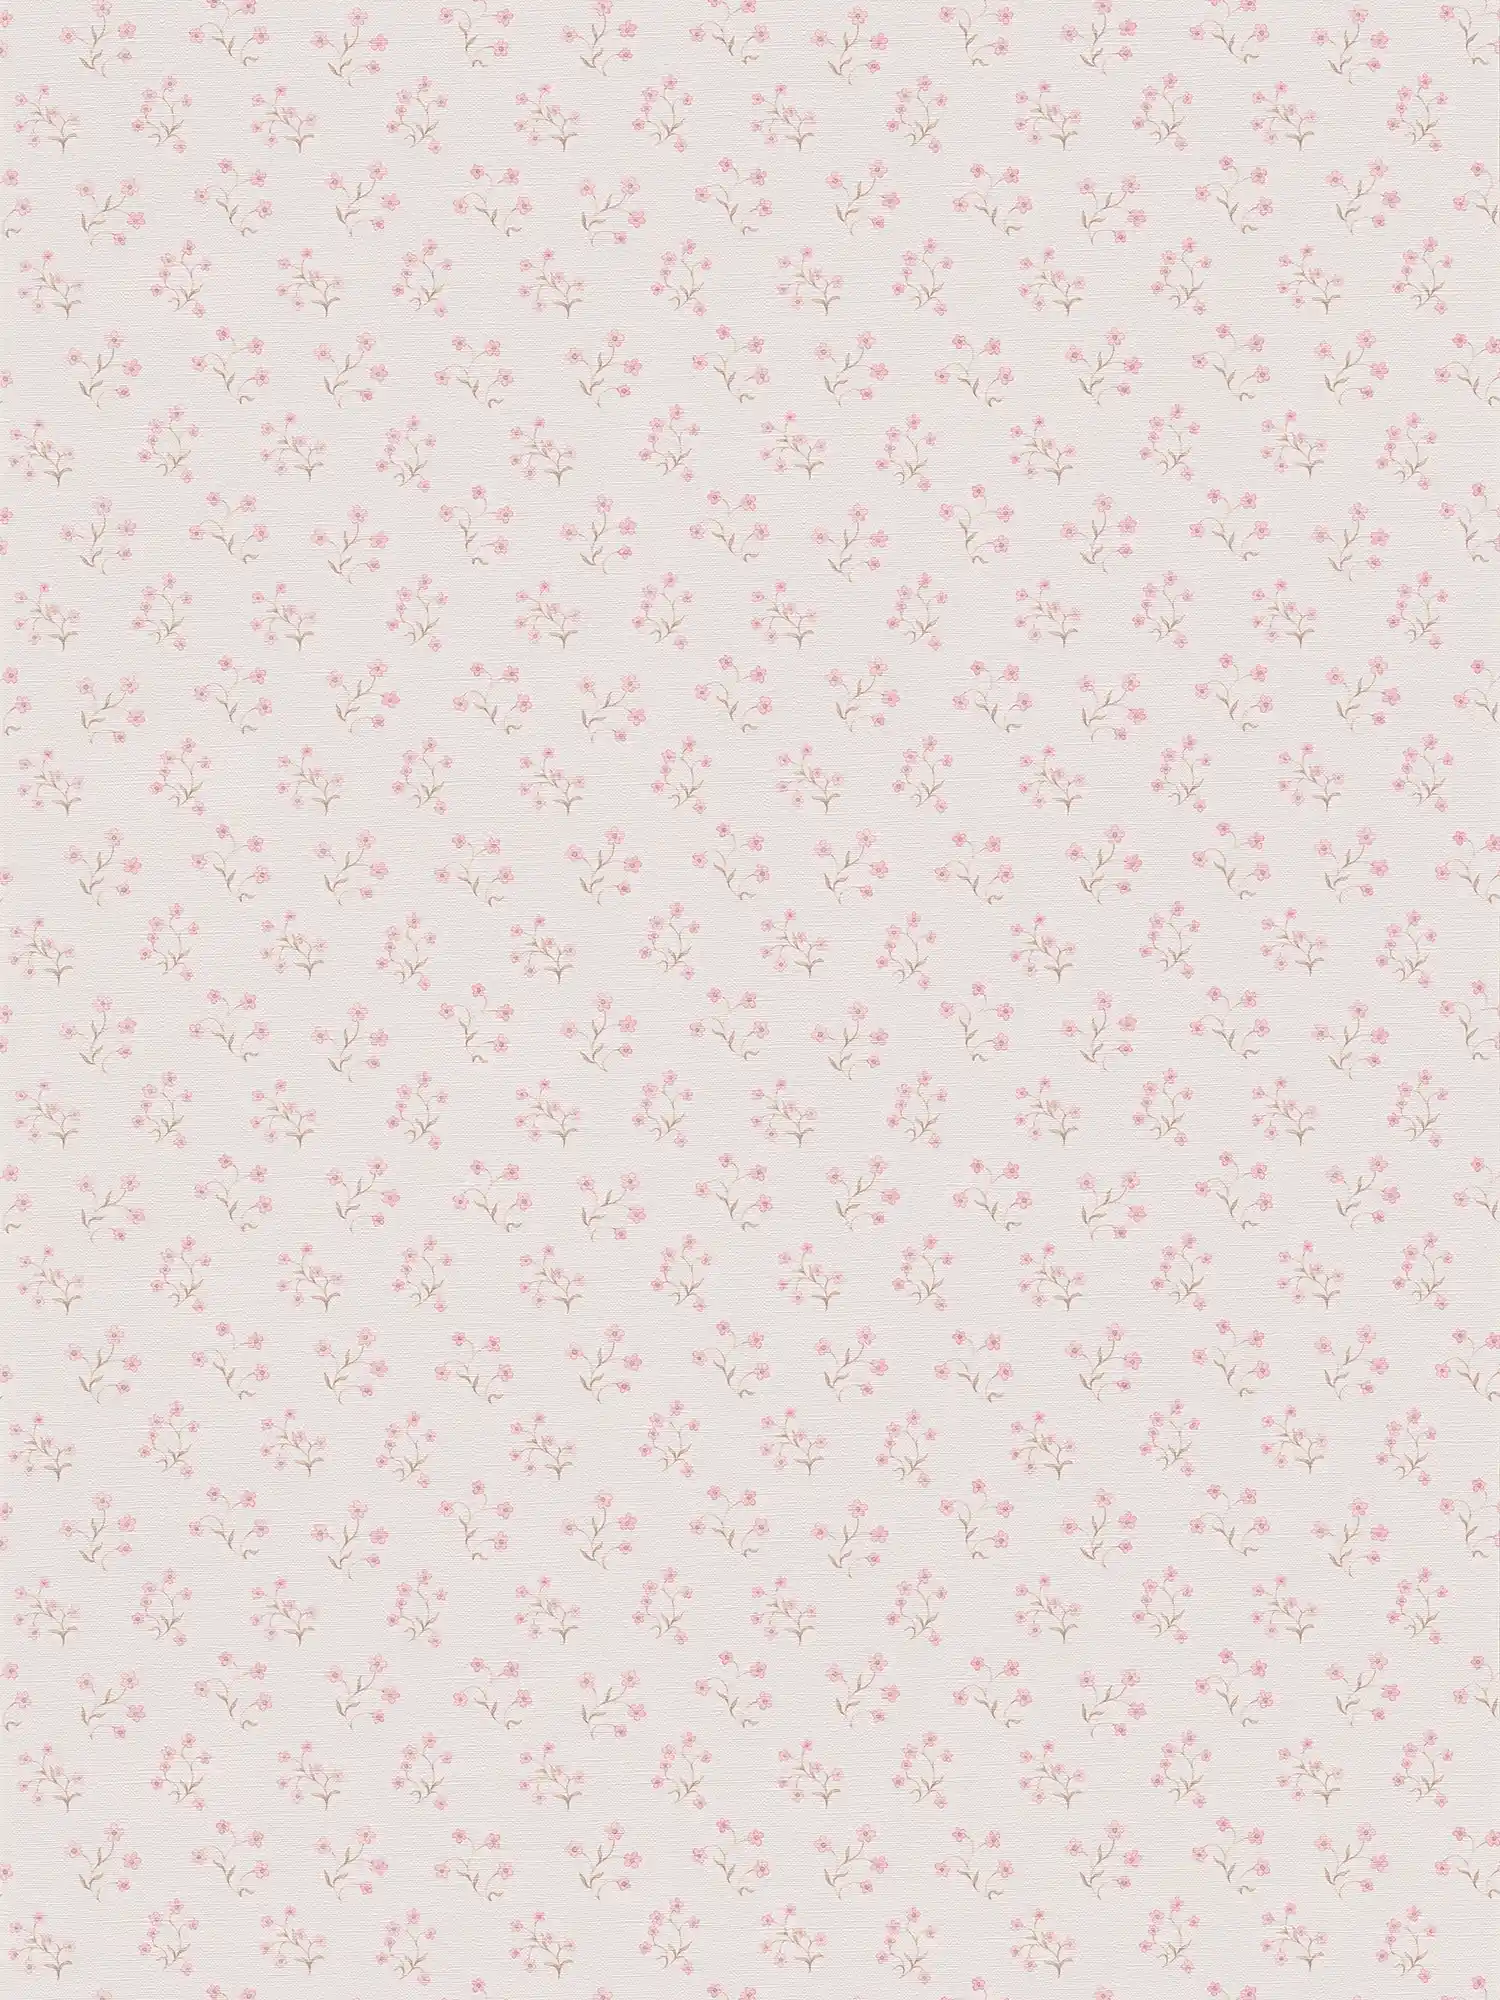 Non-woven wallpaper floral country house pattern with flowers - cream, pink, beige
